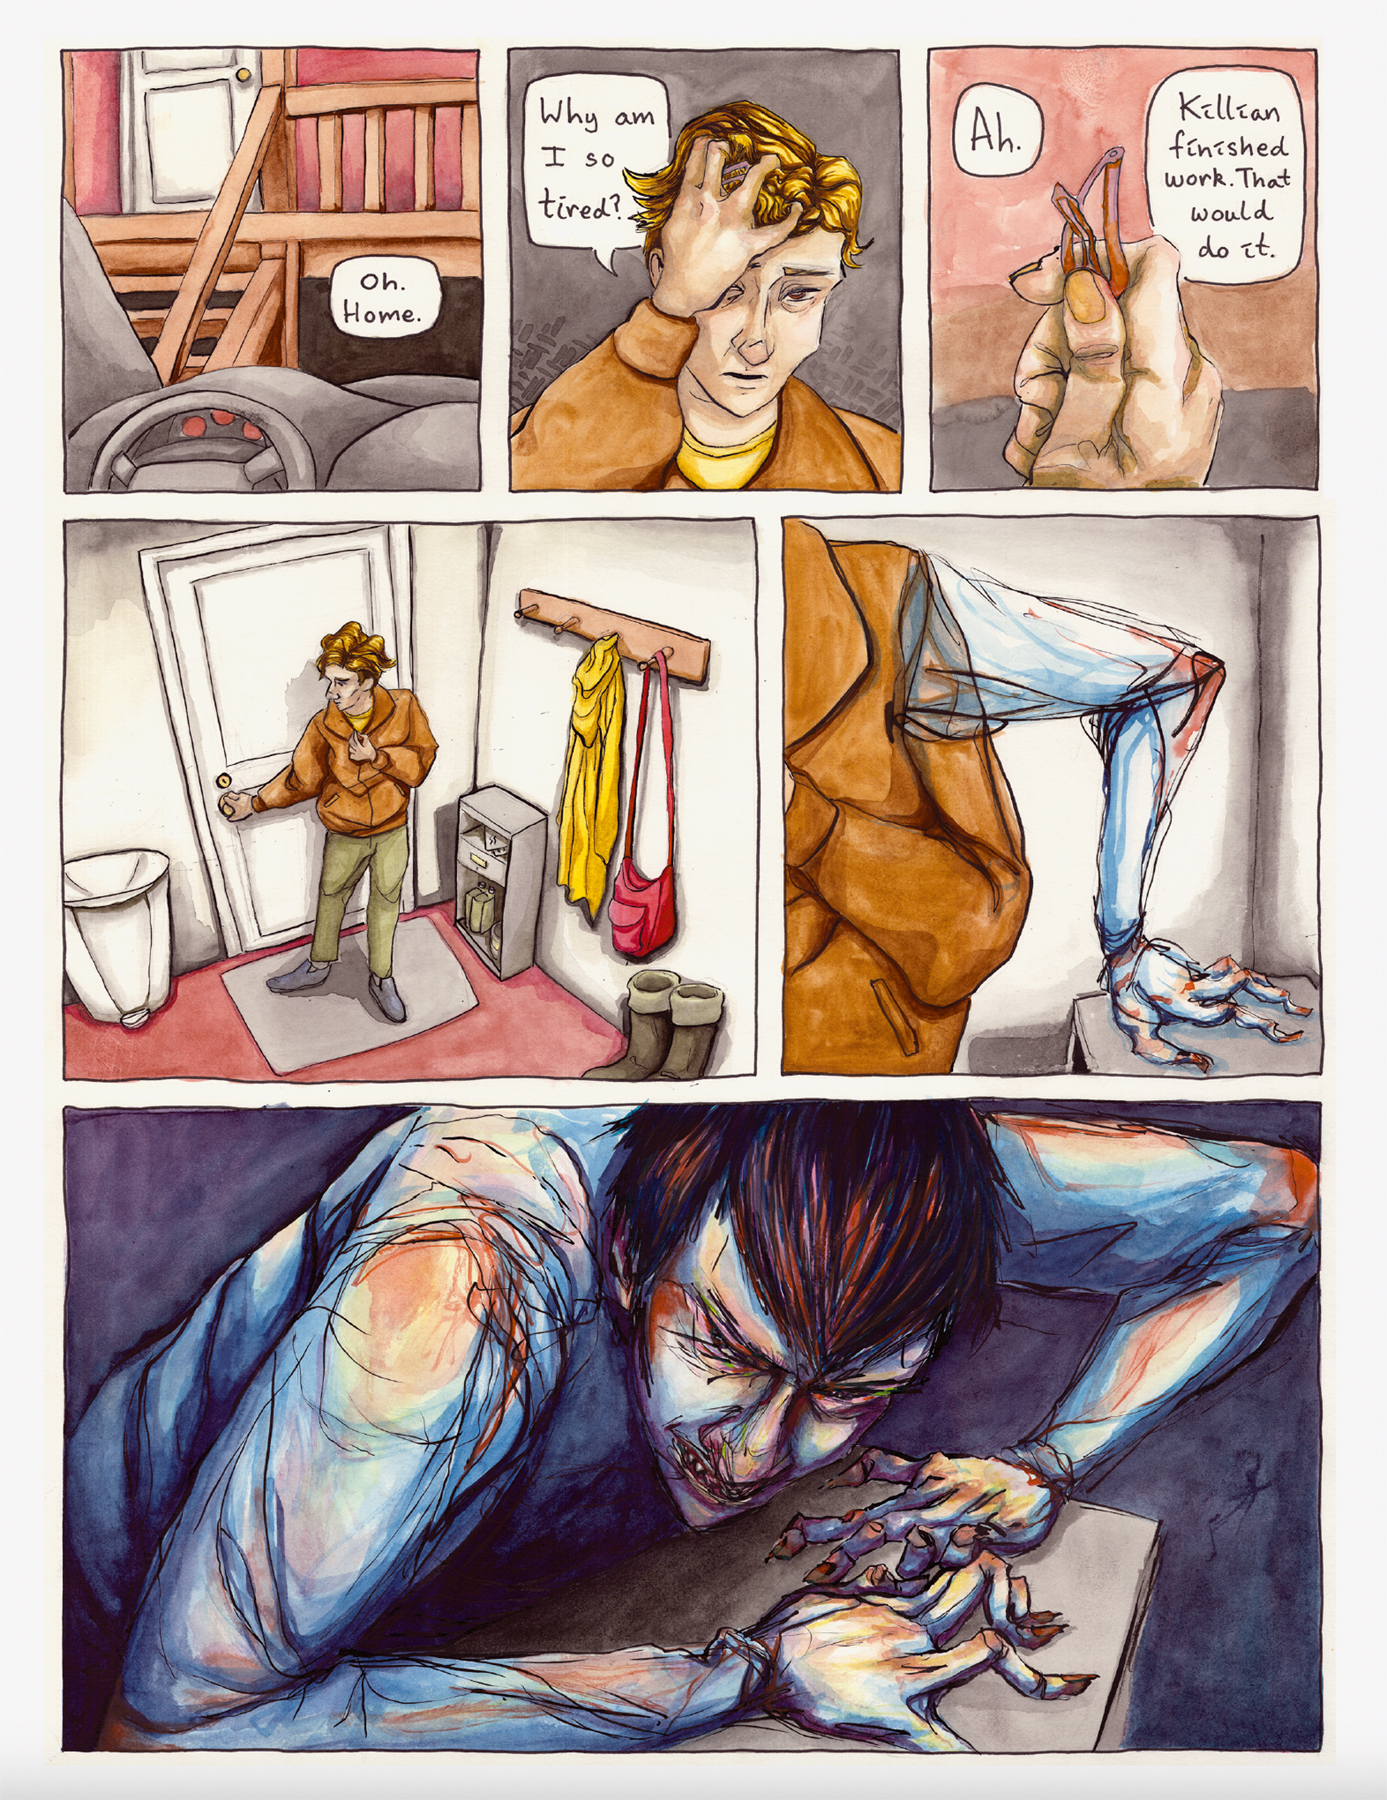 comic page from Against the Floor. Main character arrives home from work, tired. Another dark figure emerges with bared teeth from the main character. Image courtesy of Daniell Stromanthe